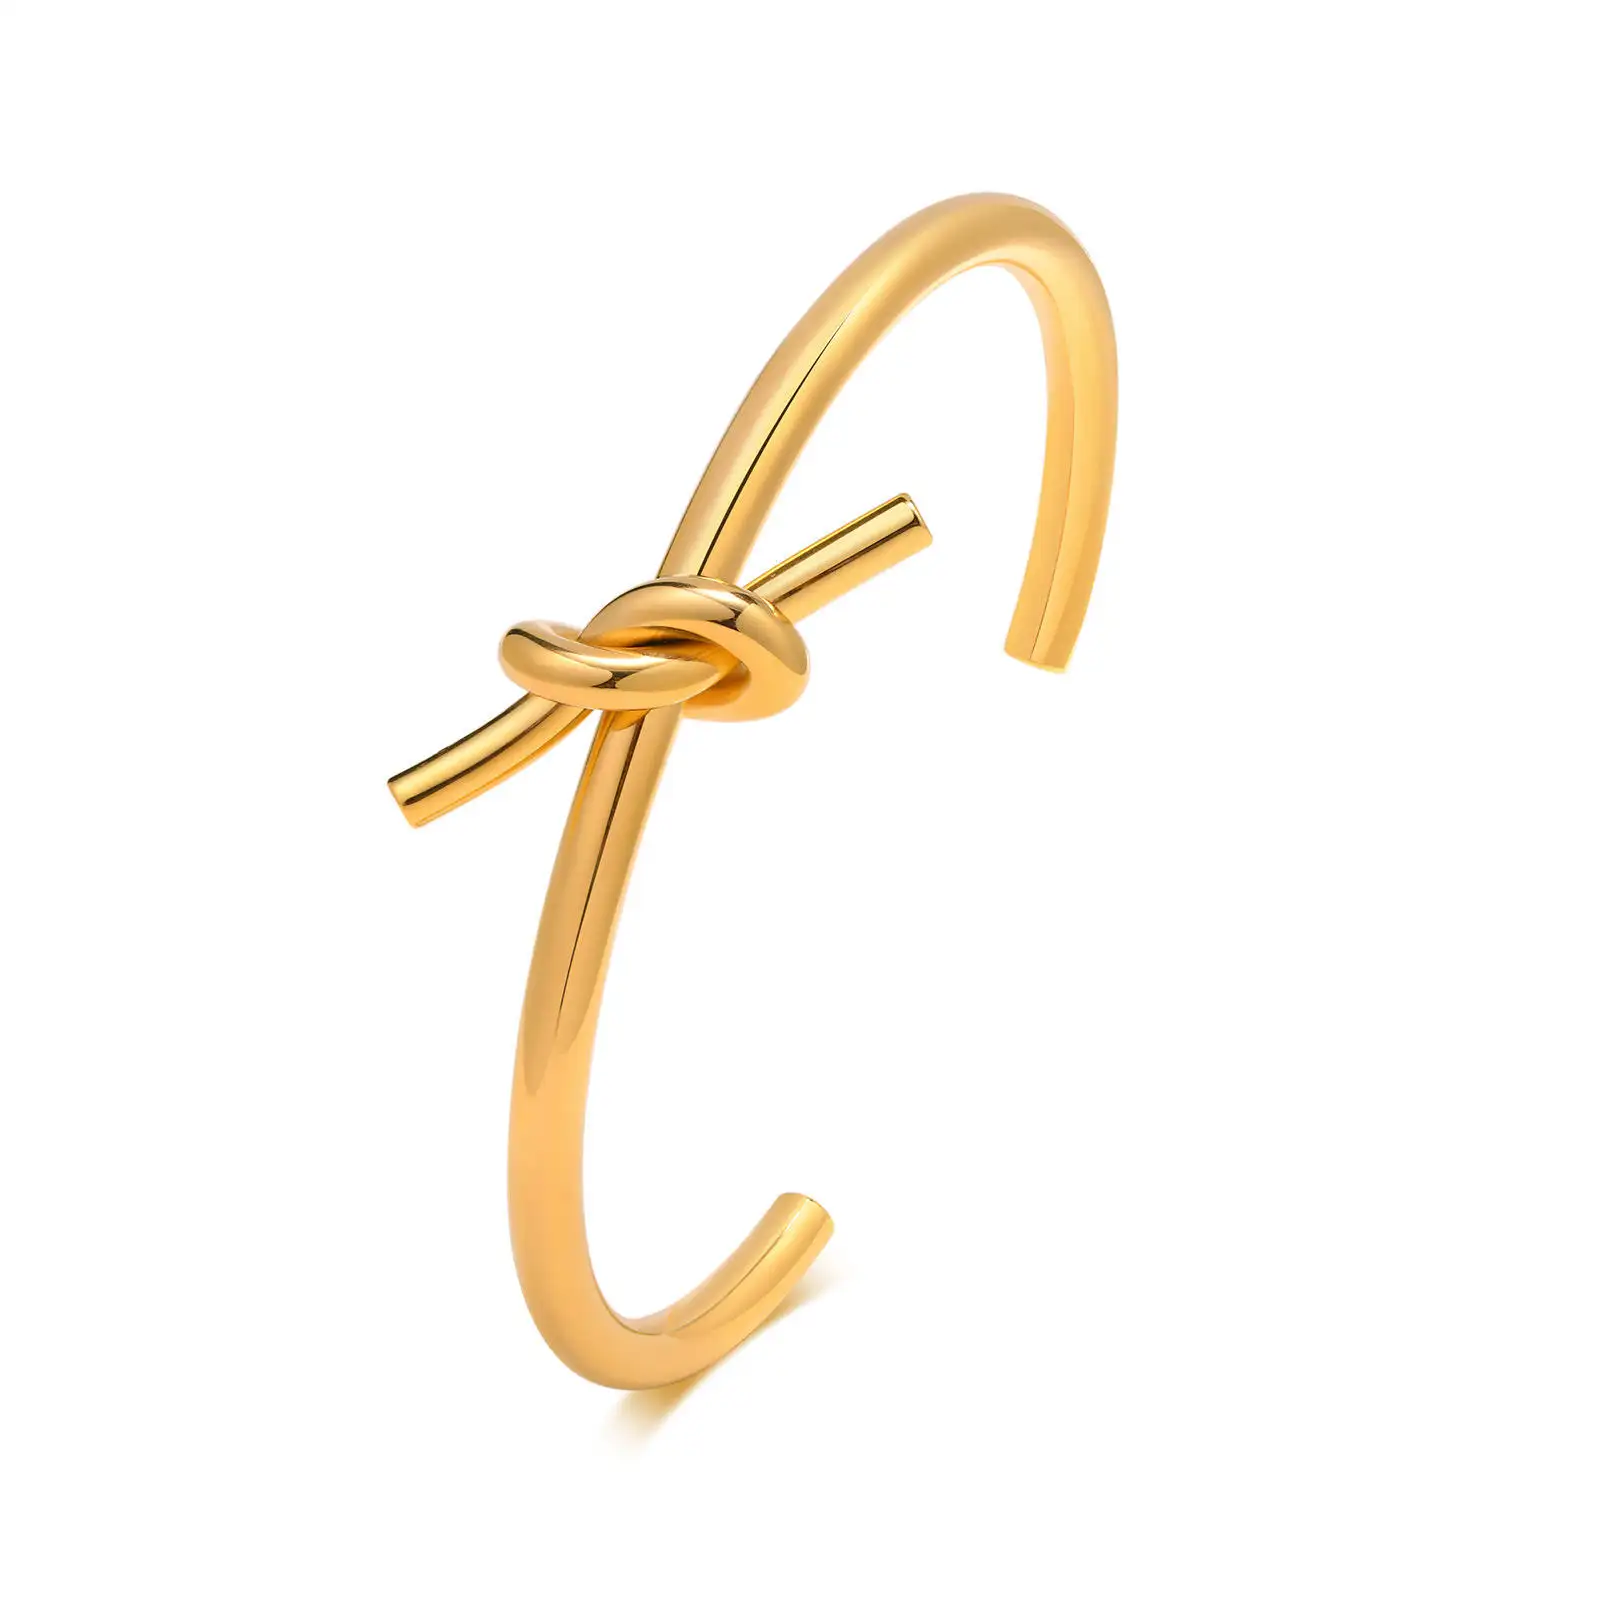 Creative Summer Fashion Jewelry Water Proof Wire Knot Bracelet Opening Gold Plated Stainless Steel Bracelet Jewelry